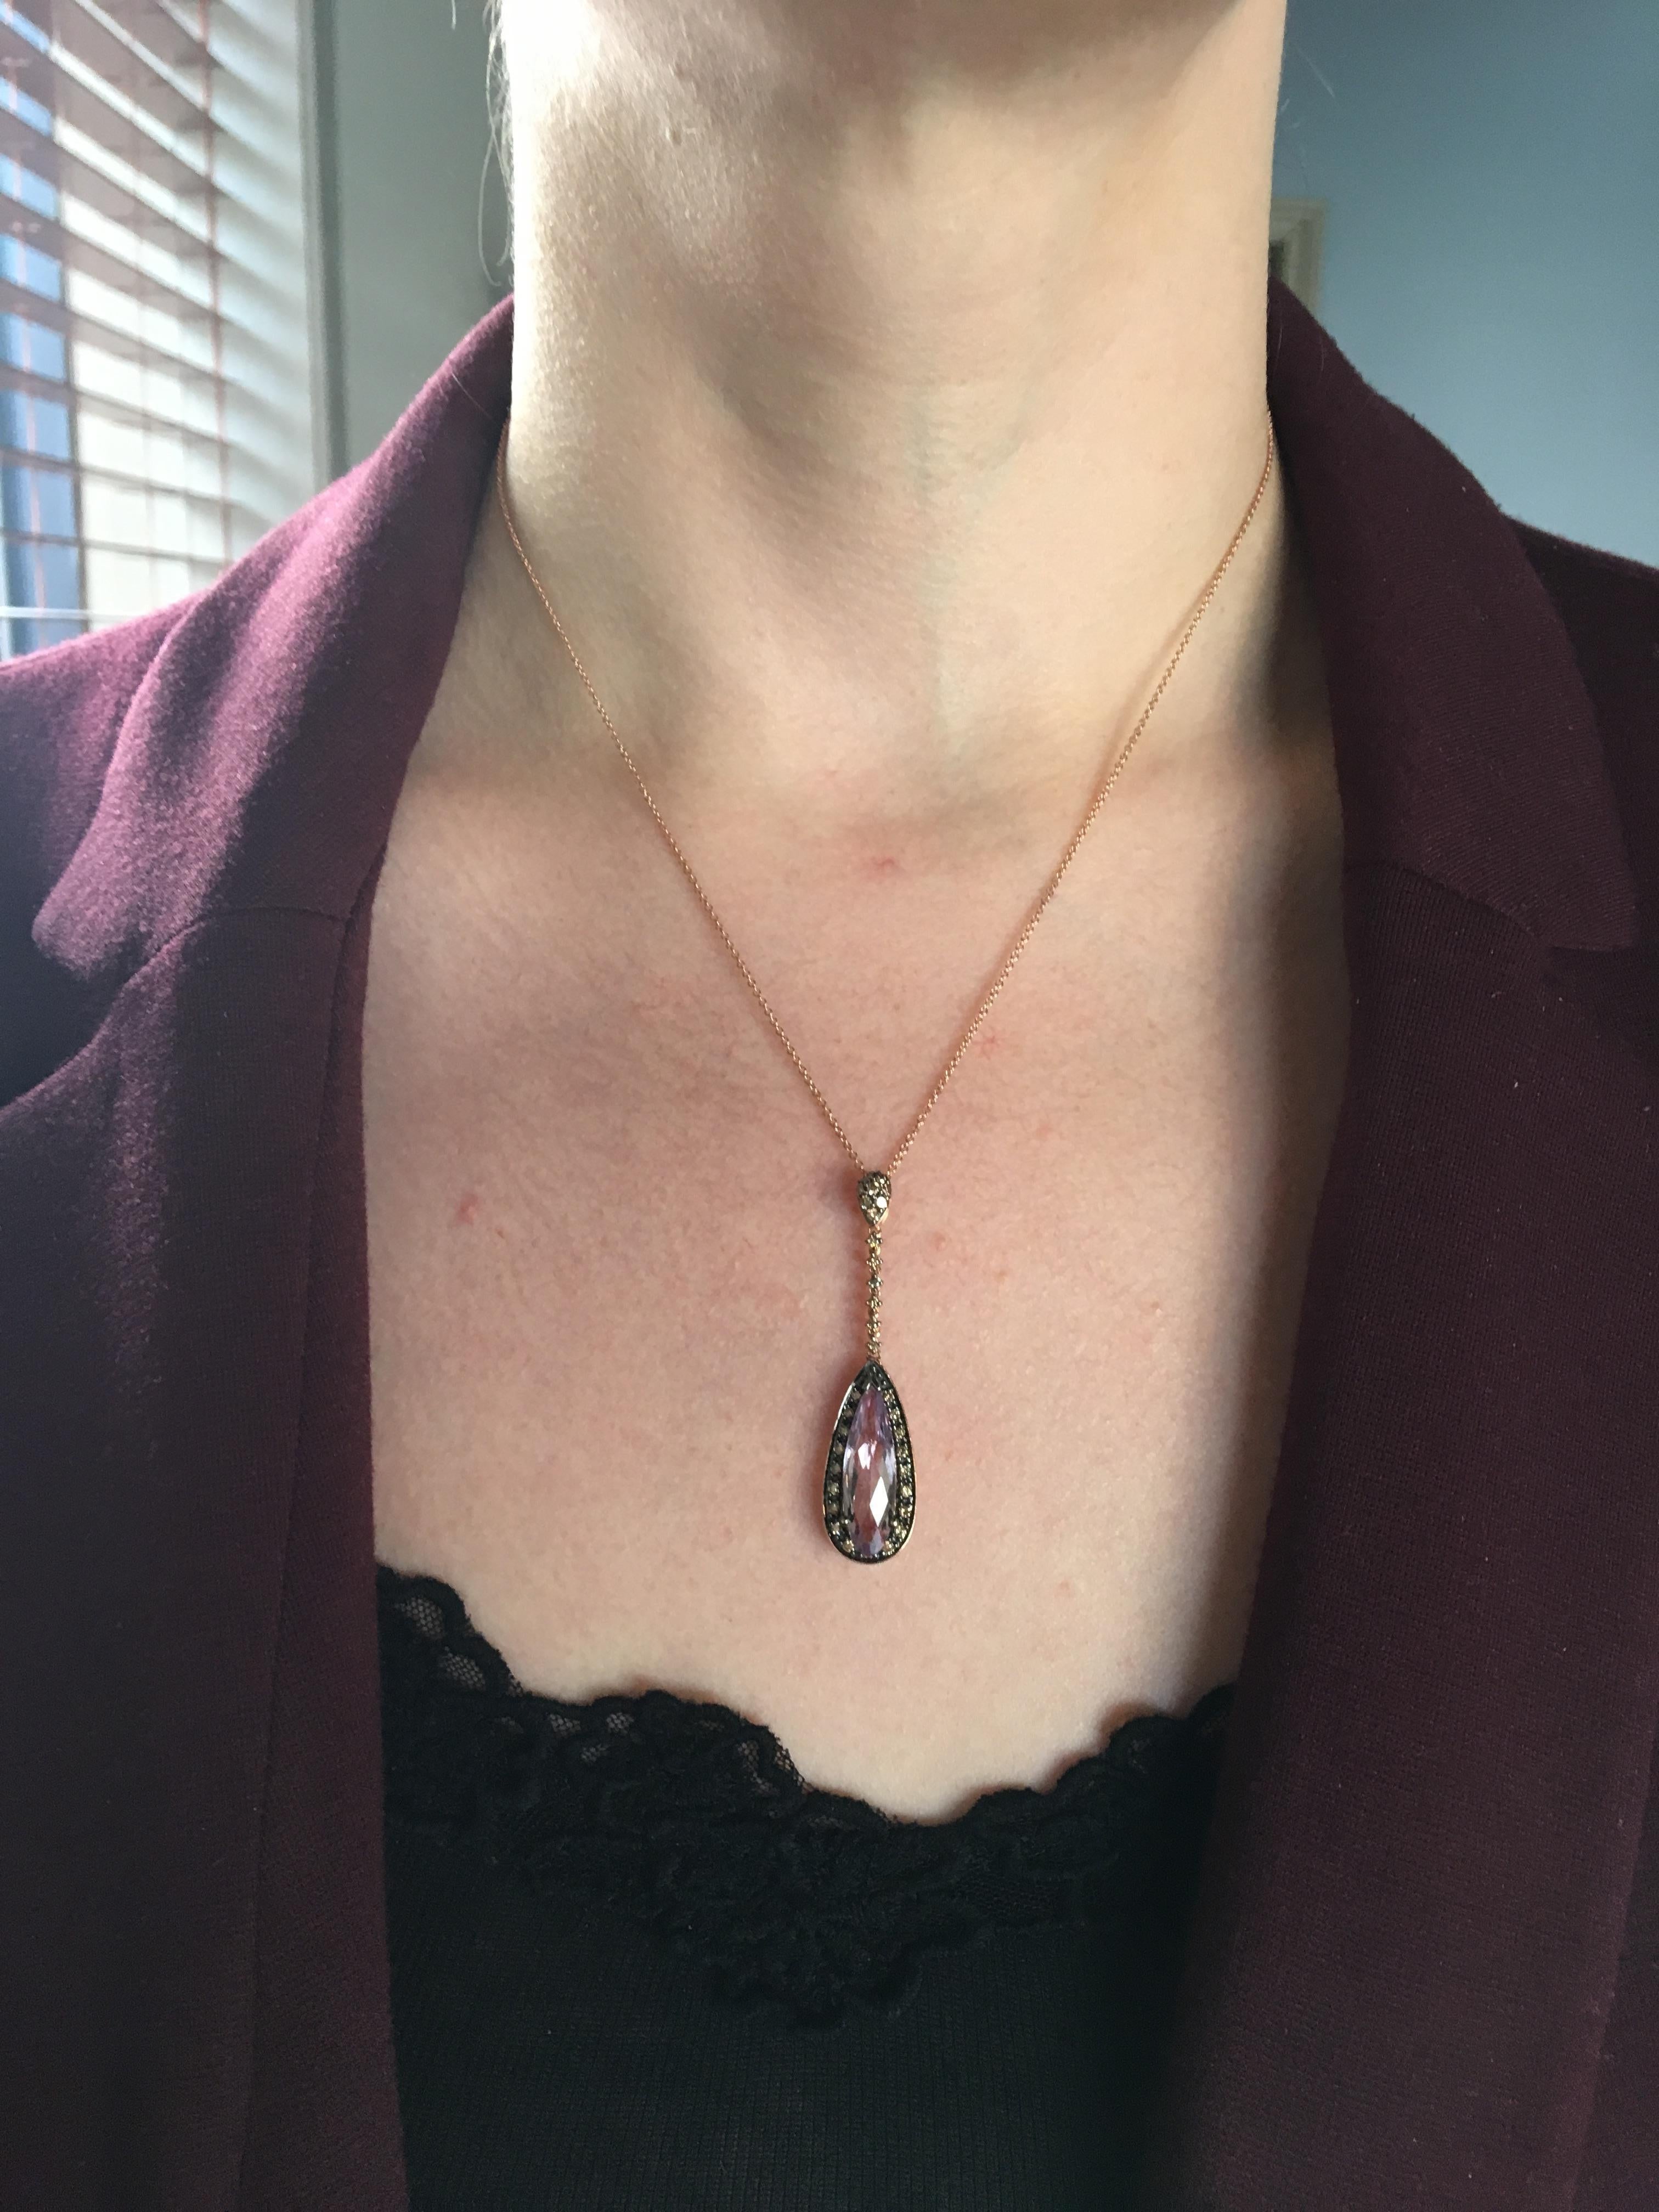 Beautiful Le Vian Amethyst Necklace Adorned with Chocolate Colored Diamonds

Designer: Le Vian
Gemstone: Elongated Pear Shaped Amethyst
Gemstone Size: Approximately 19 x 6mm
Diamond Carat Weight: Approximately .375CTW
Diamond Cut: 33 Round Brilliant